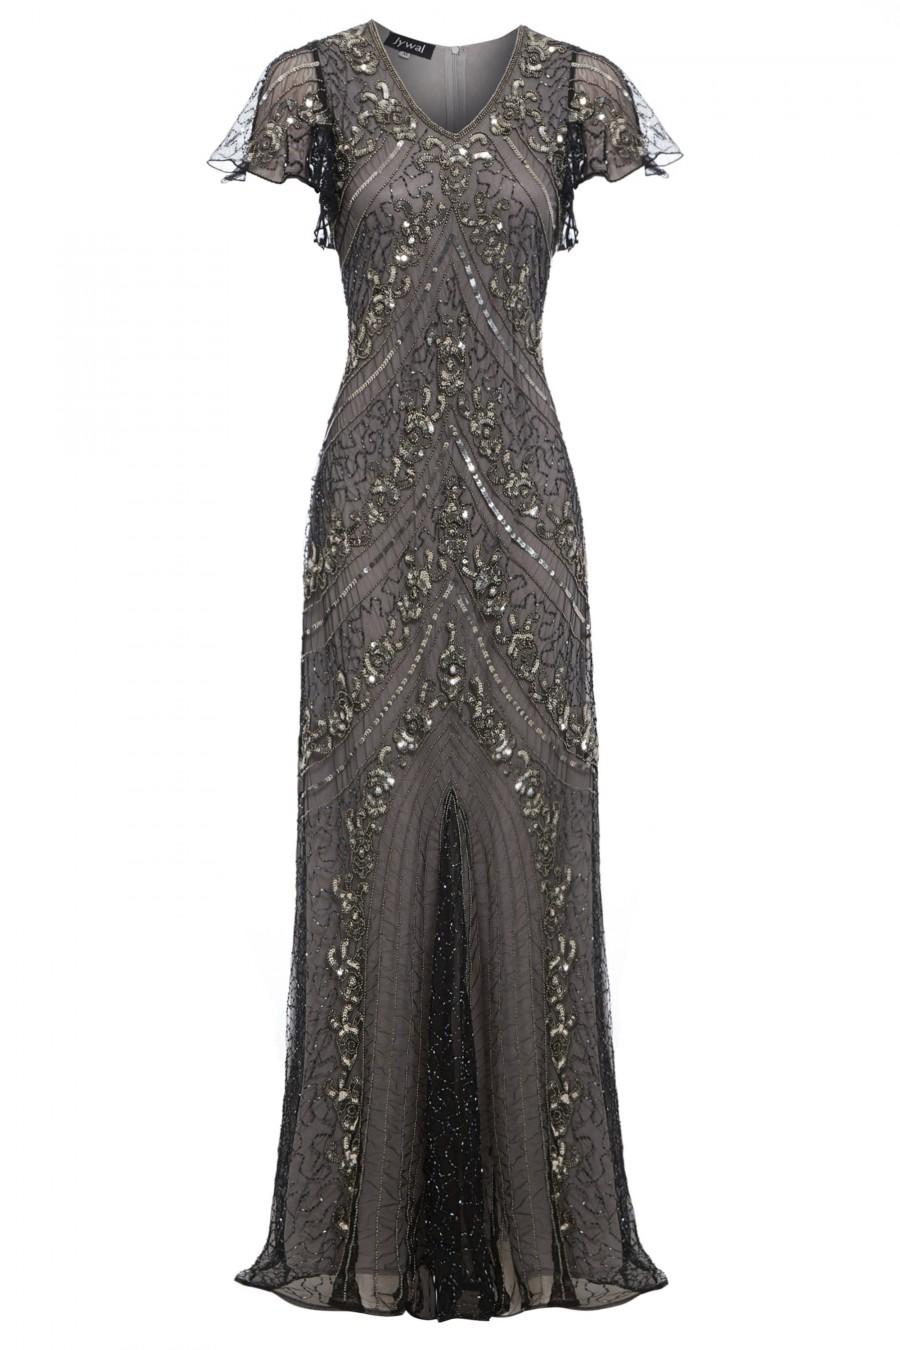 Lima Embellished Flapper Dress, 1920s Great Gatsby Inspired, Downton ...